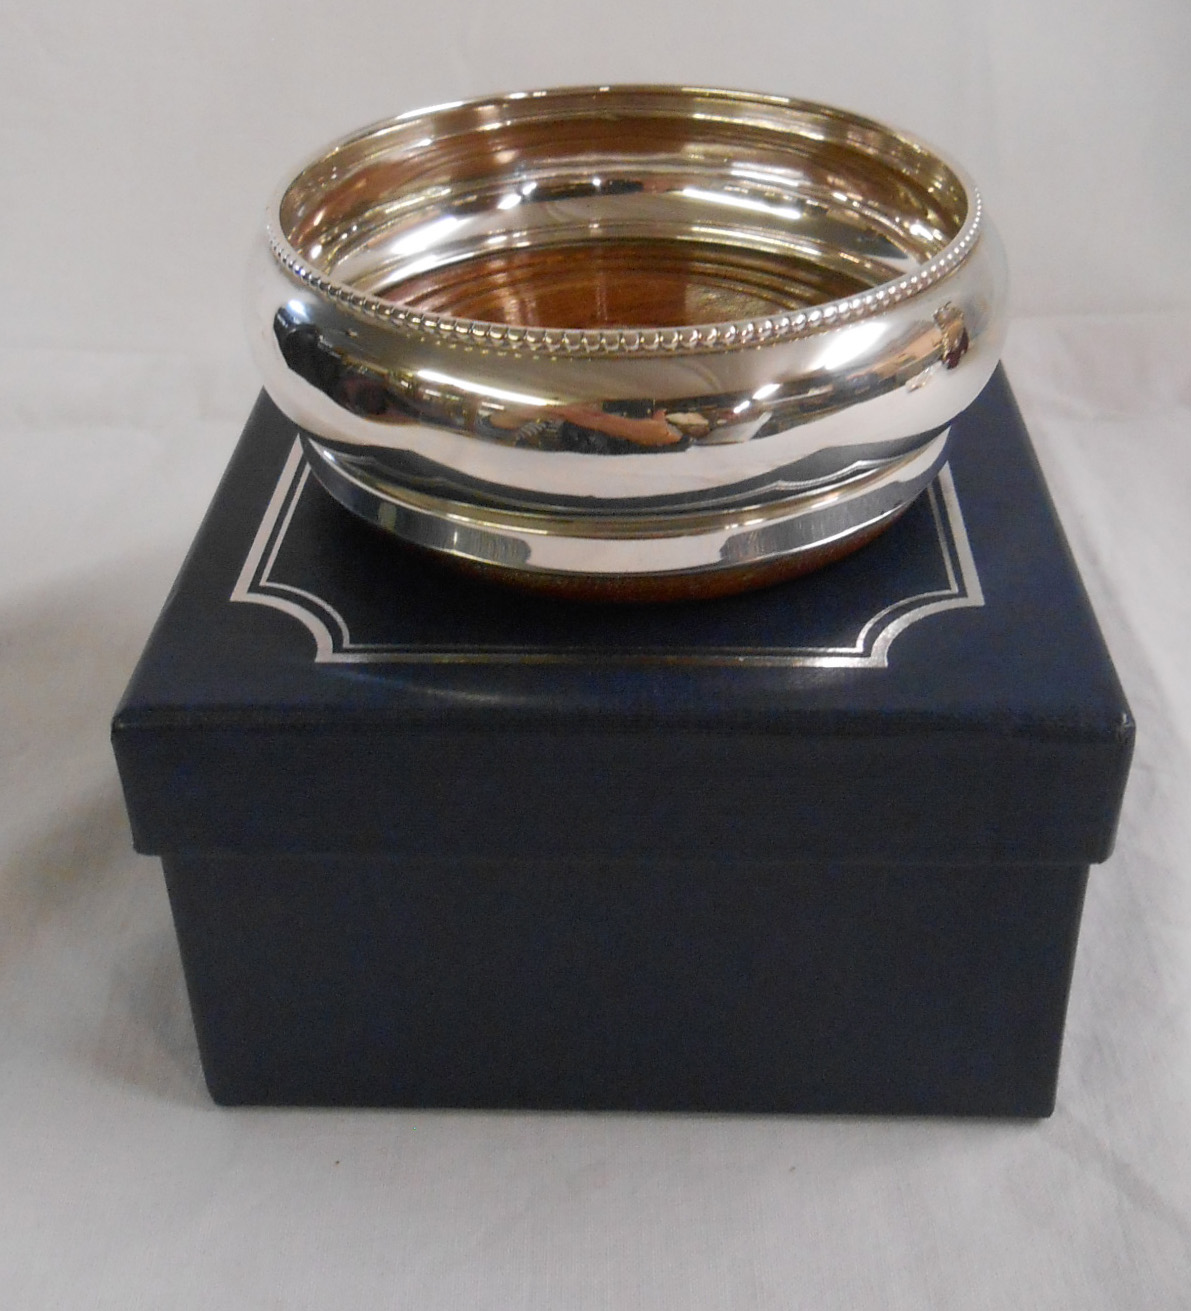 A modern silver wine coaster by Broadway & Co., with wooden base - Birmingham 2000